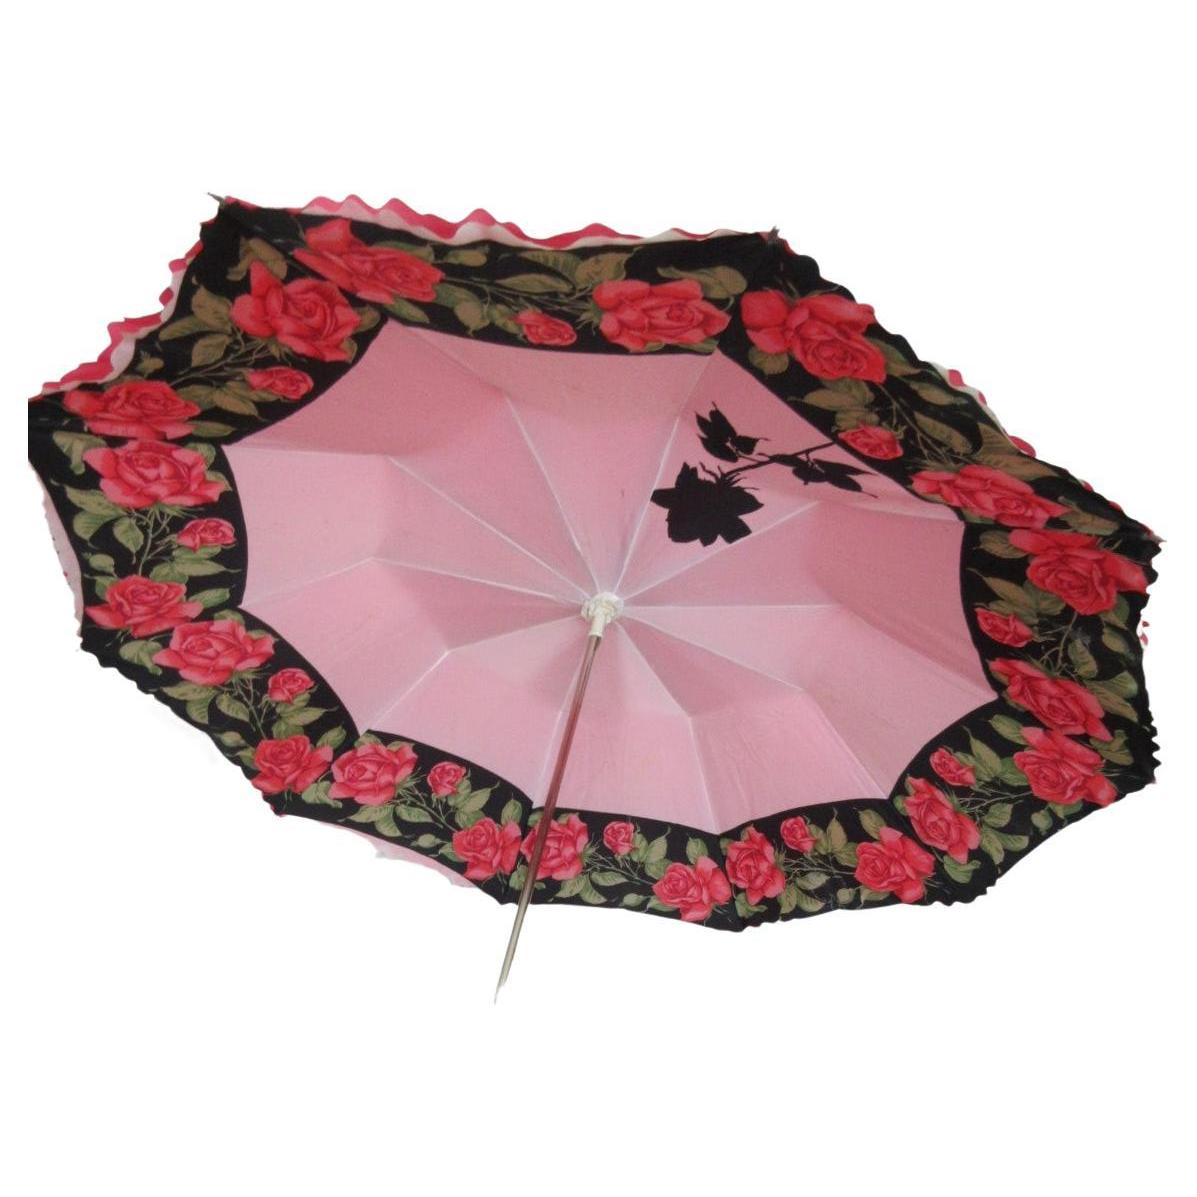 1960's Barbie Pink Umbrella Parasol Roses with Horse Details For Sale